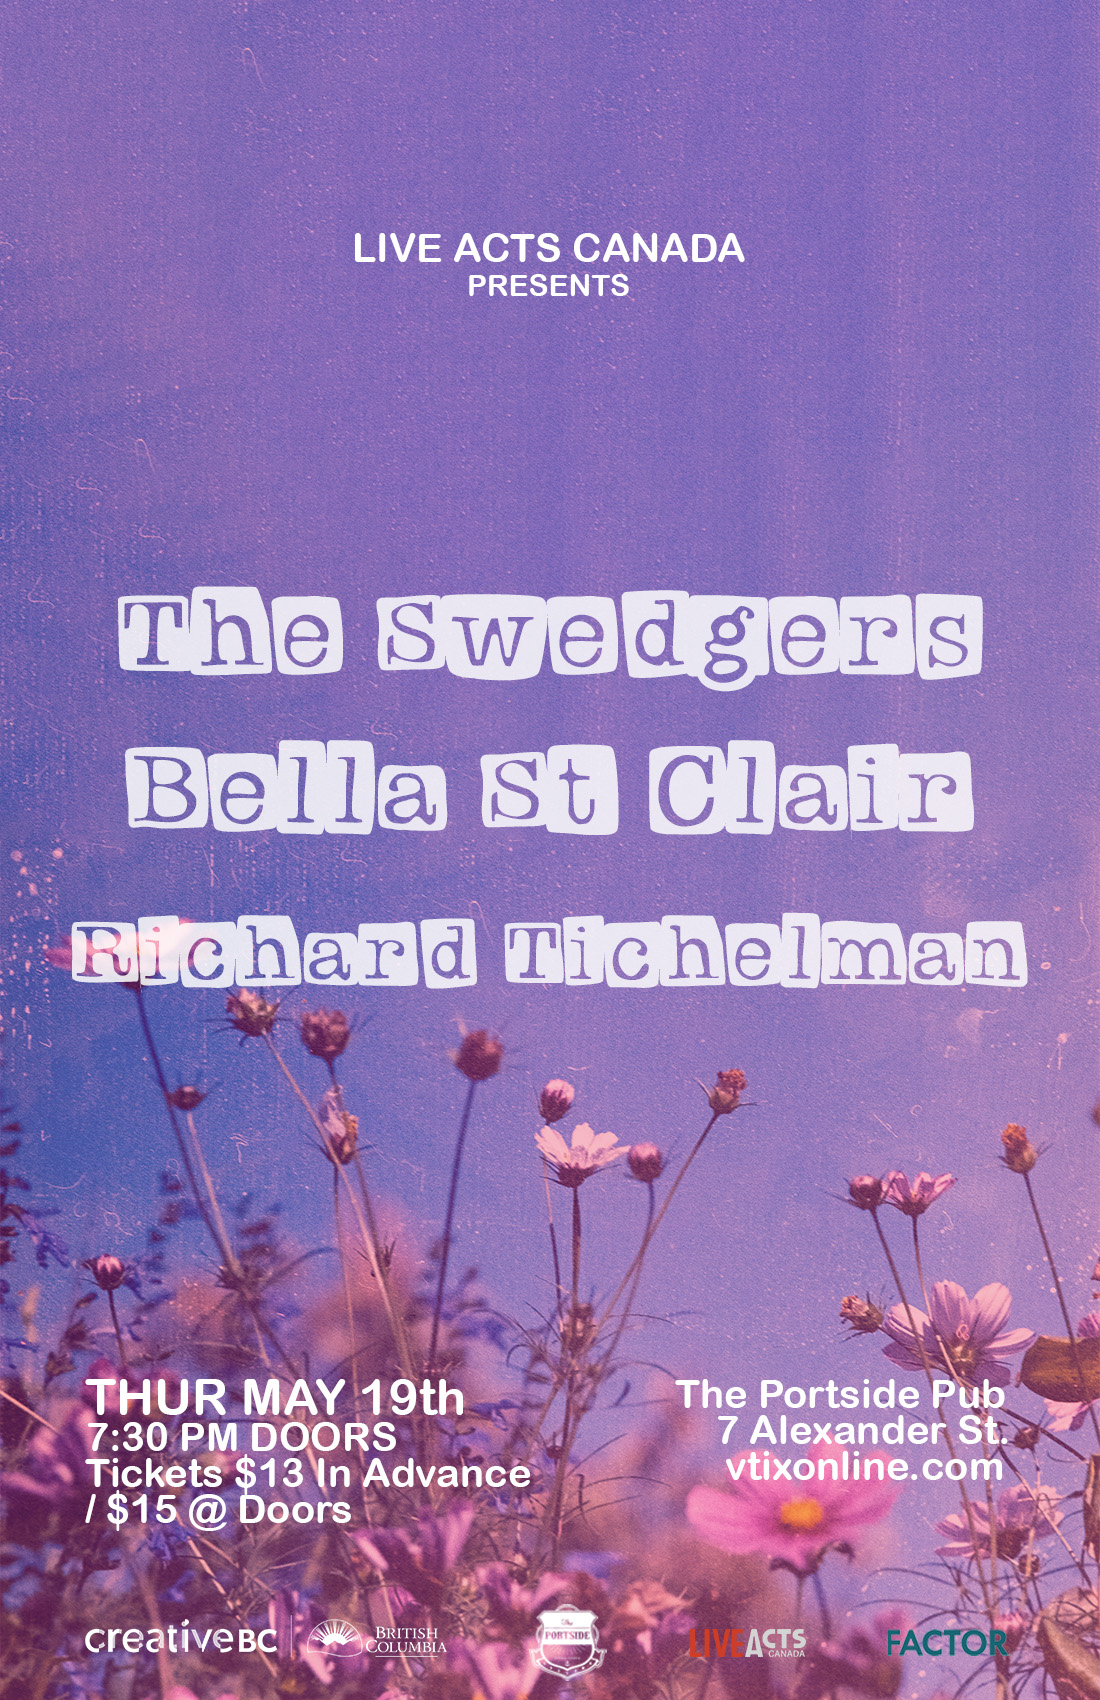 The Swedgers With Special Guests, Bella St. Clair, and Richard Tichelman 